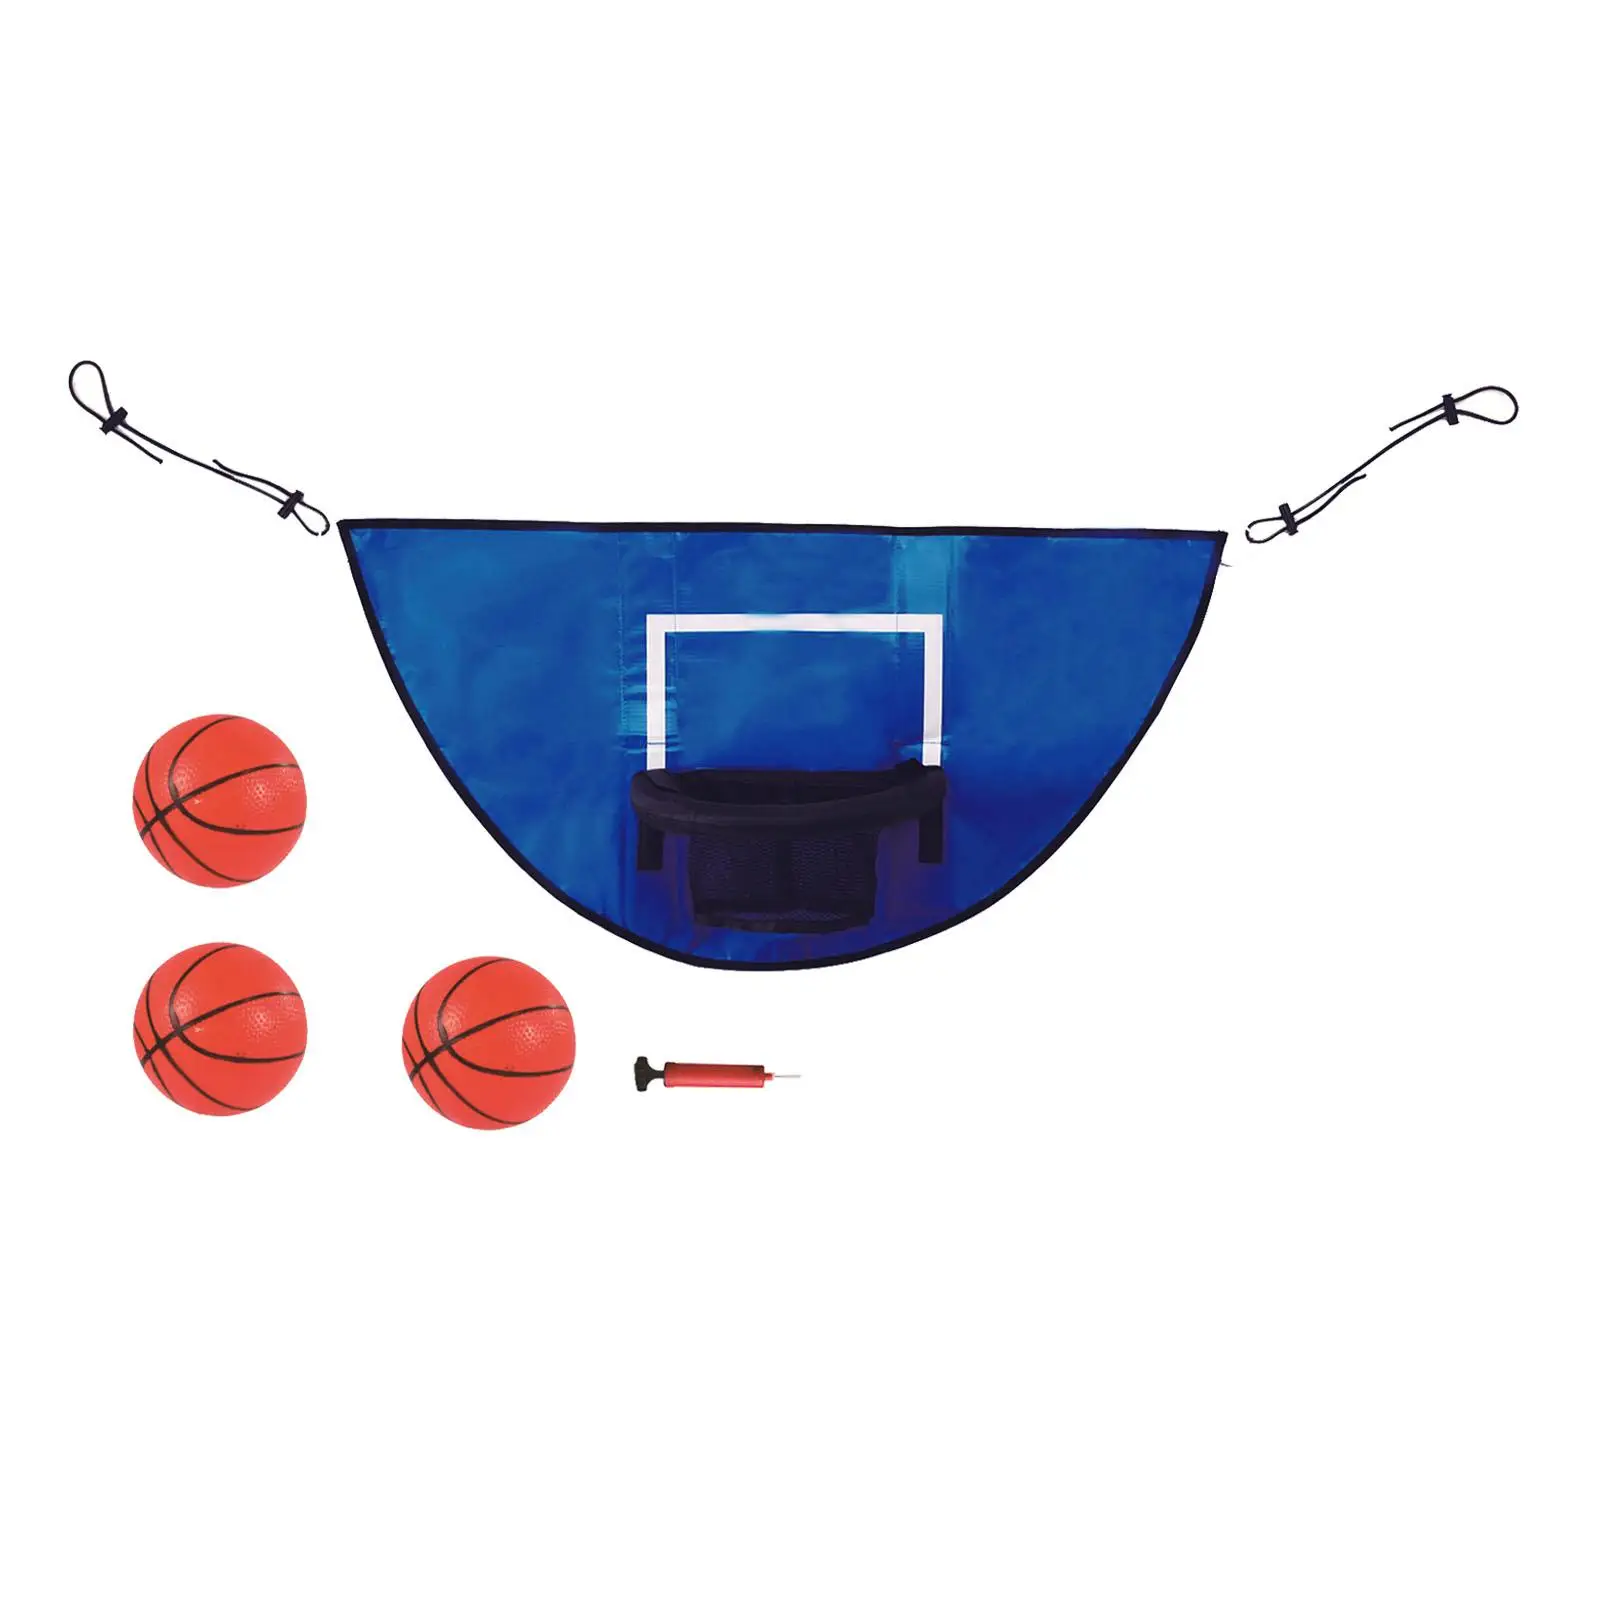 Mini Trampoline Basketball Hoop with Ball, Pump Goal Game Waterproof Materials Breakaway Rim for Safety Dunking Basketball Frame